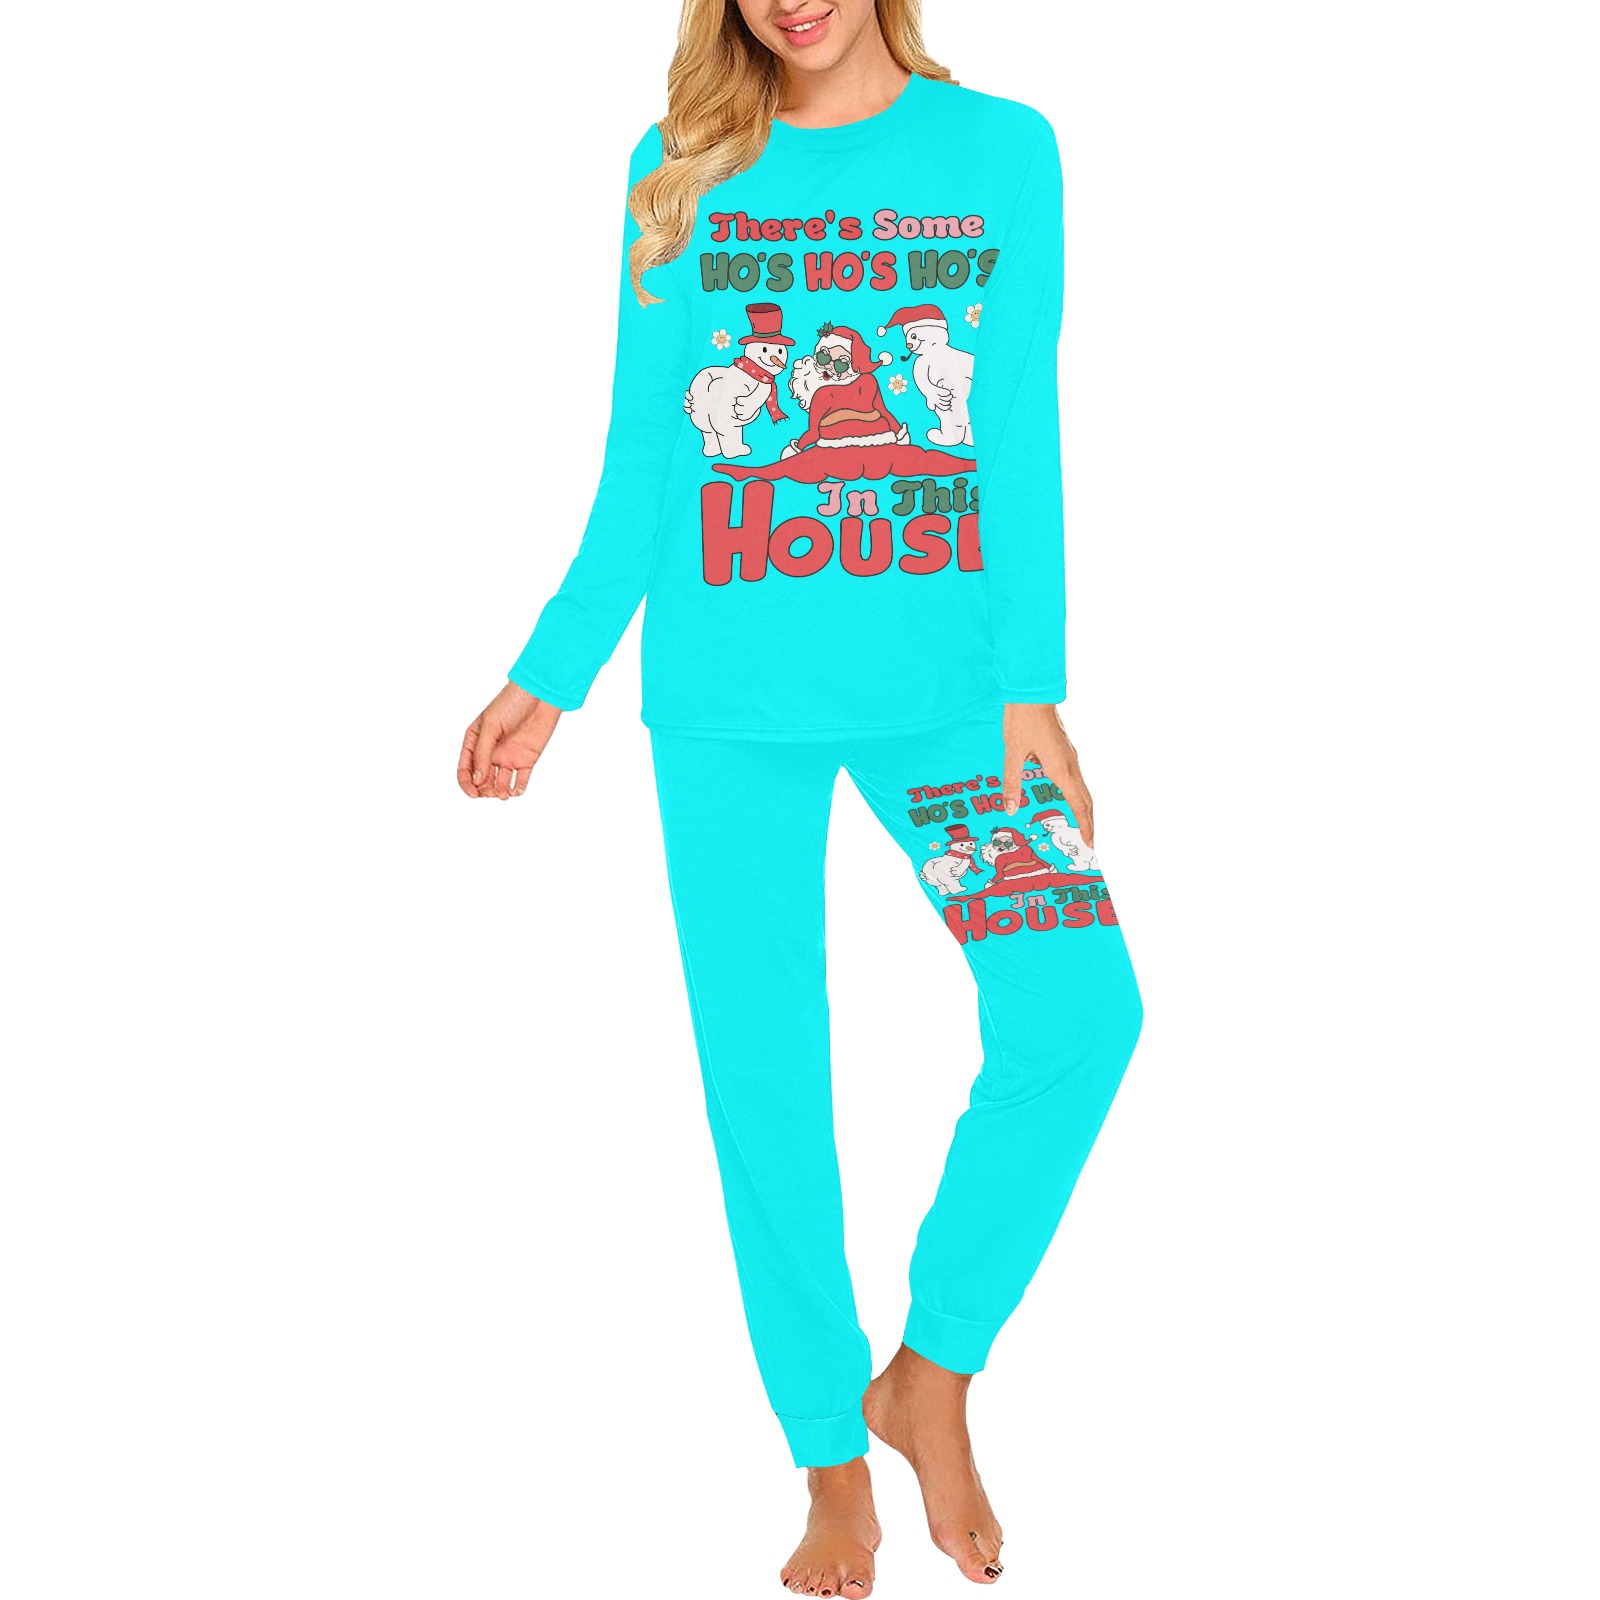 There's Some Ho's In This House Women's All Over Print Pajama Set